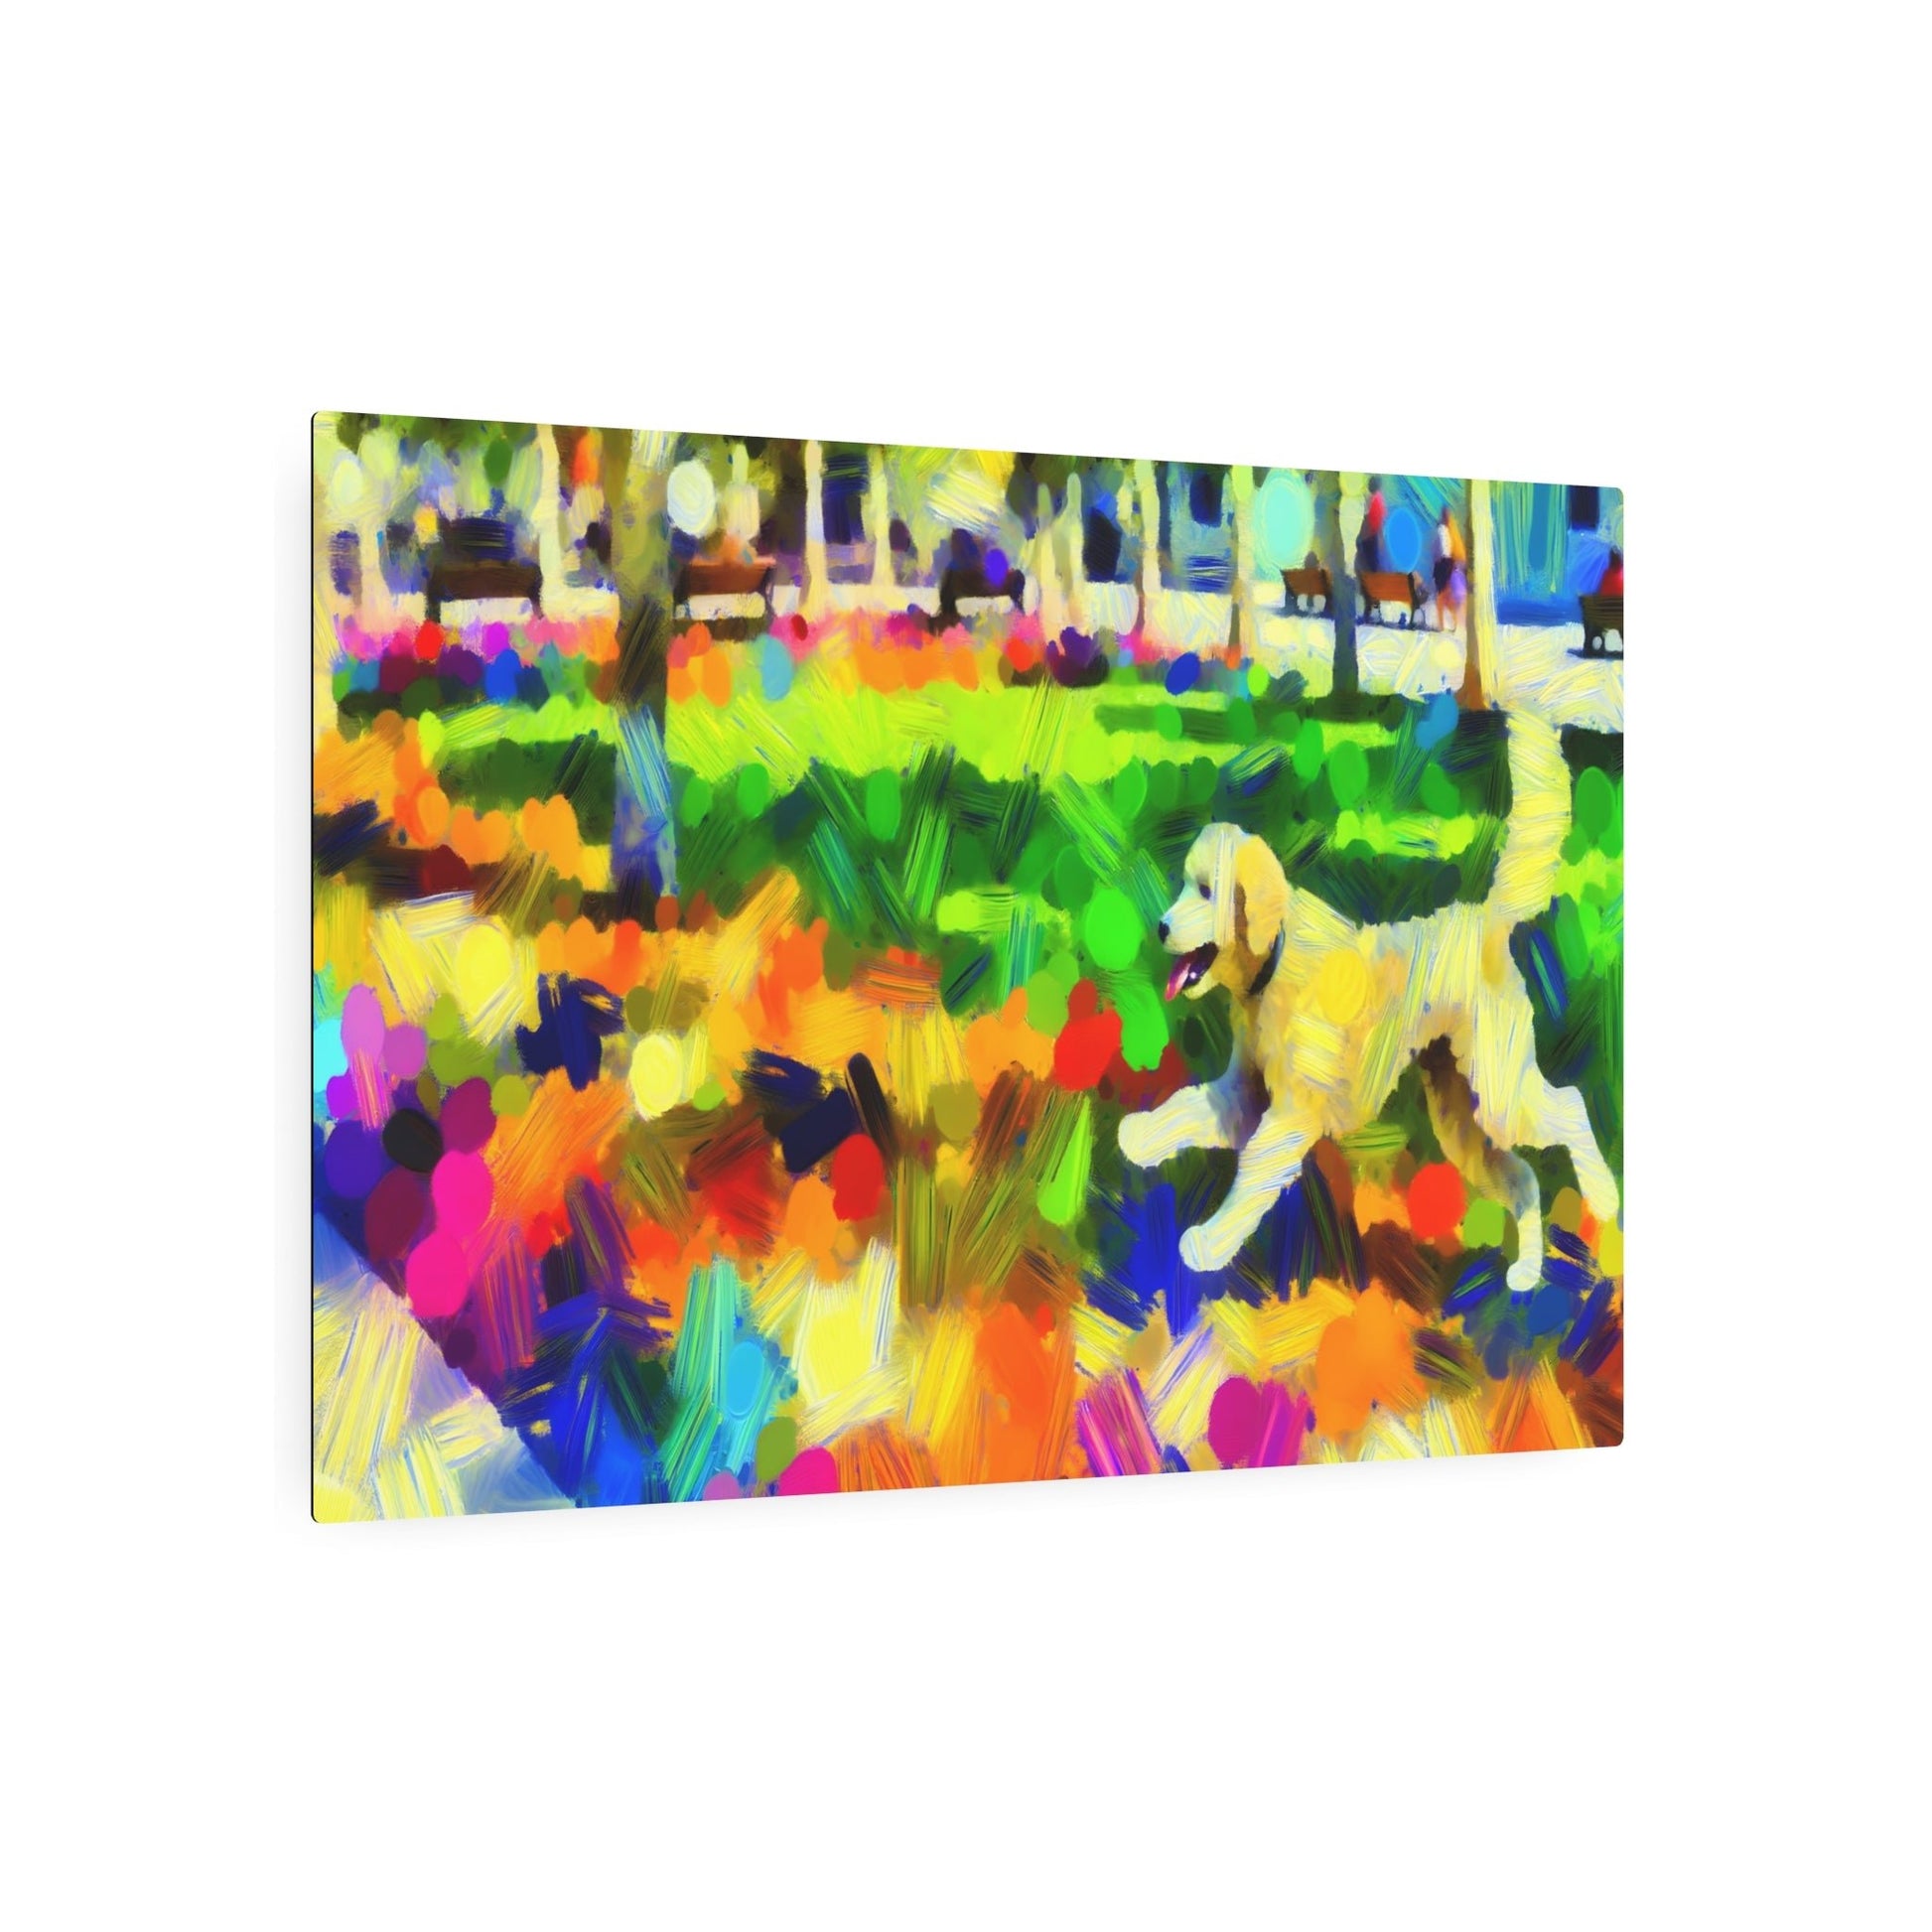 Metal Poster Art | "Impressionistic Western Art Style - Vibrant Colorful Brushstrokes of a Dog Playing in Sunny Park" - Metal Poster Art 36″ x 24″ (Horizontal) 0.12''